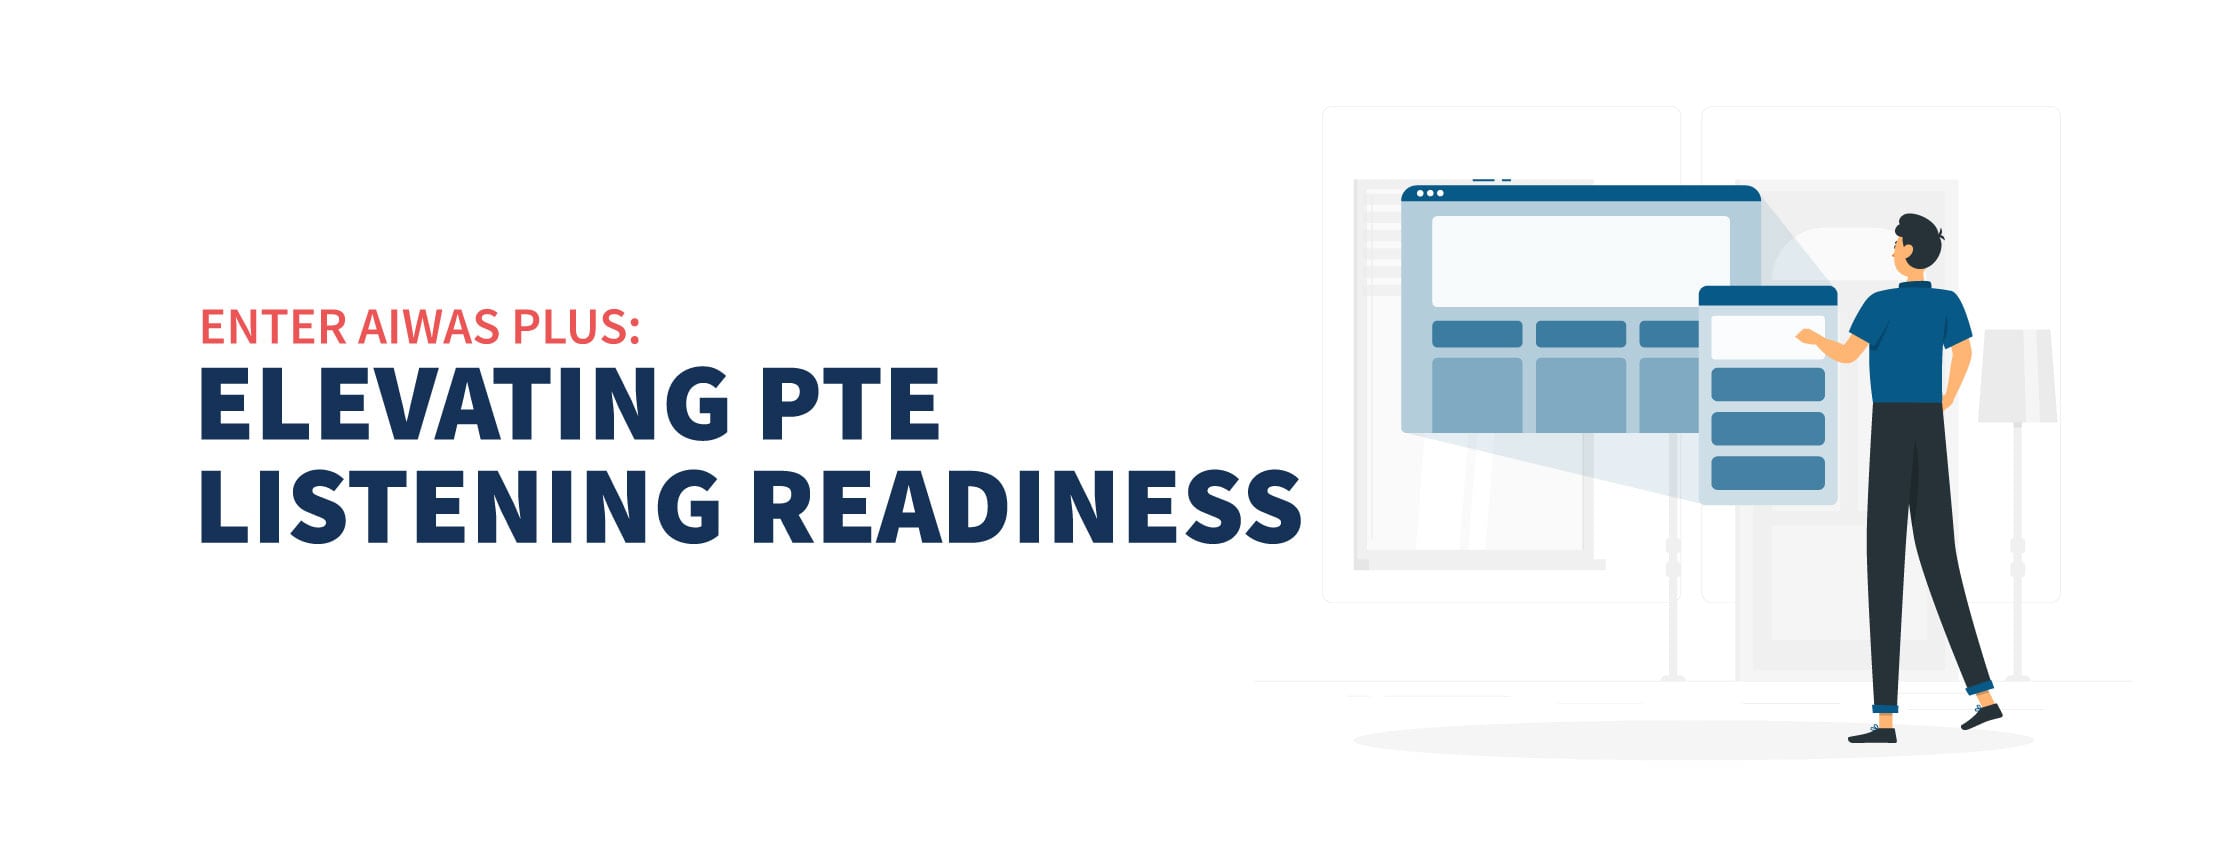 Enter AIWAS Plus: Elevating PTE Listening Readiness